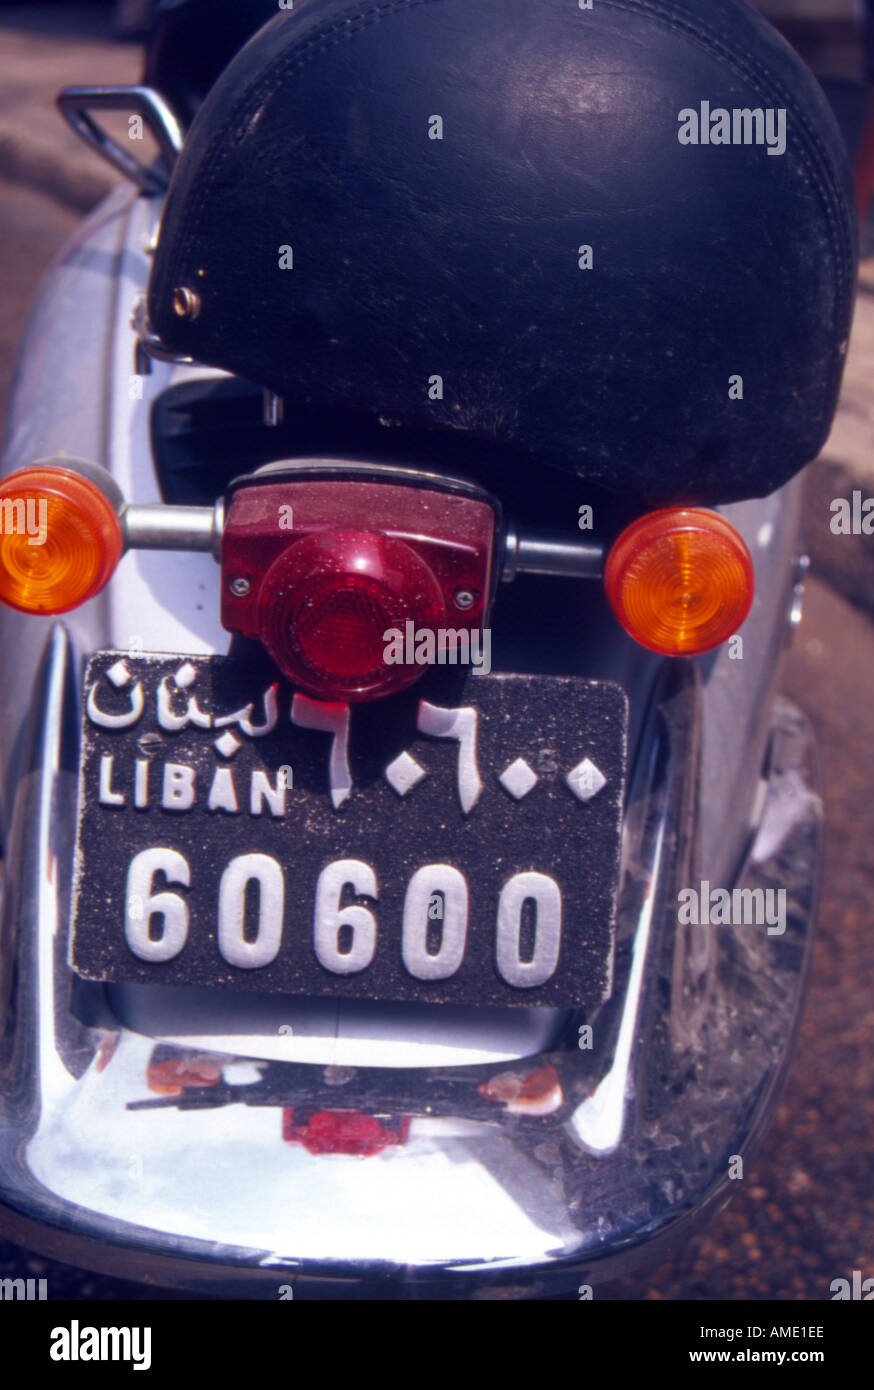 motorcycle with its old number plate beirut lebanon Stock Photo - Alamy